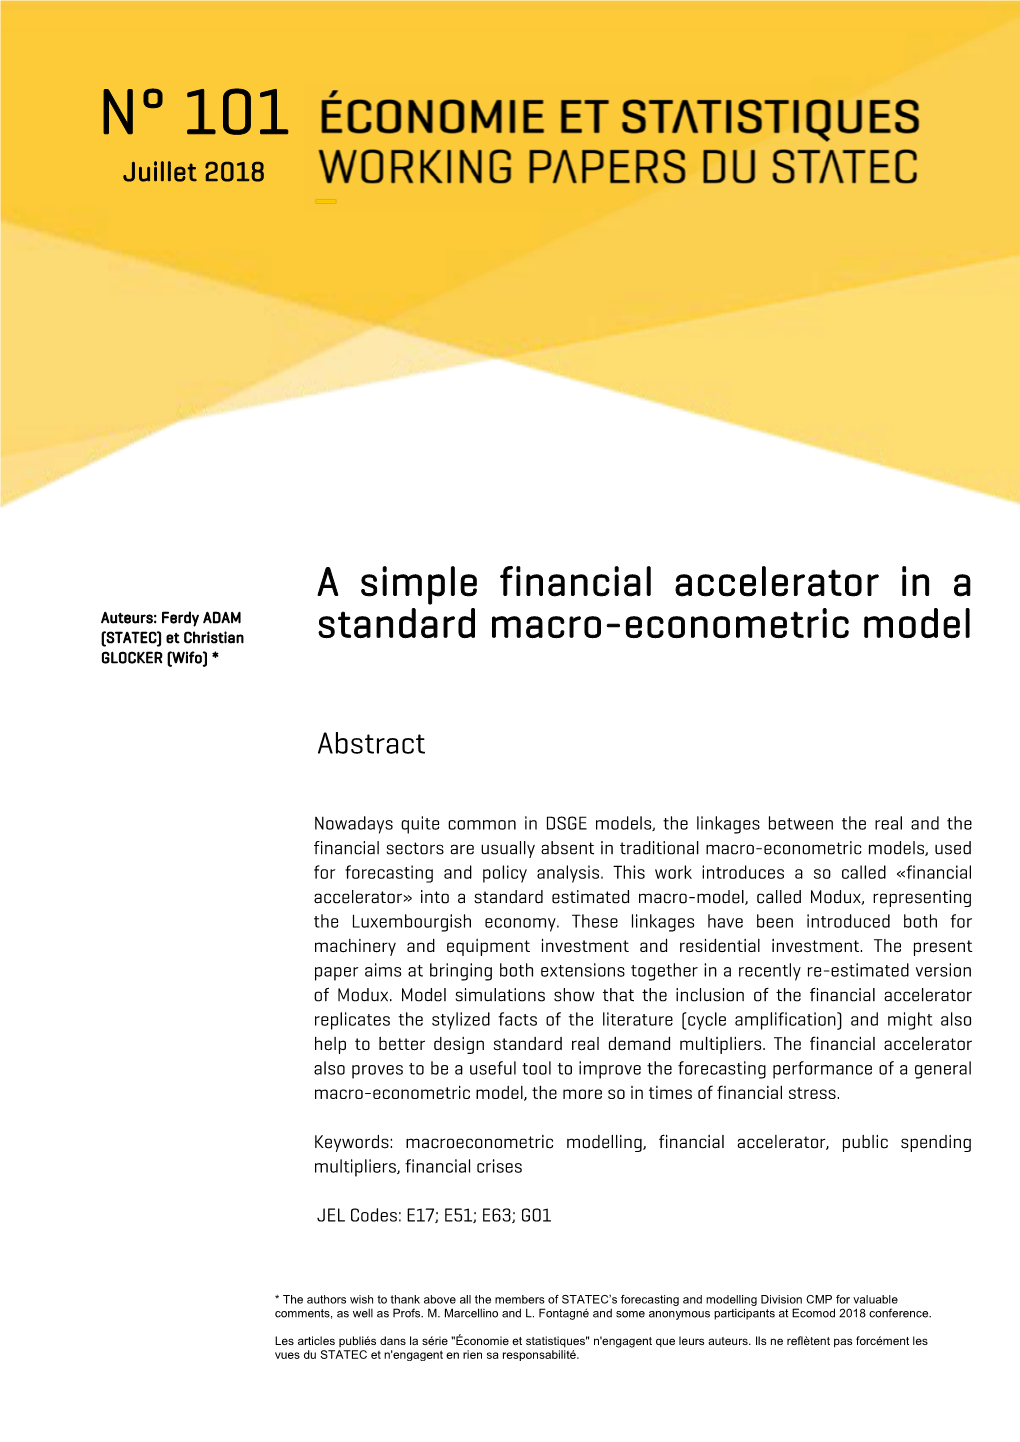 A Simple Financial Accelerator in a Standard Macro-Econometric Model Statistiques Working Papers Du STATEC N° 101 Juillet 2018